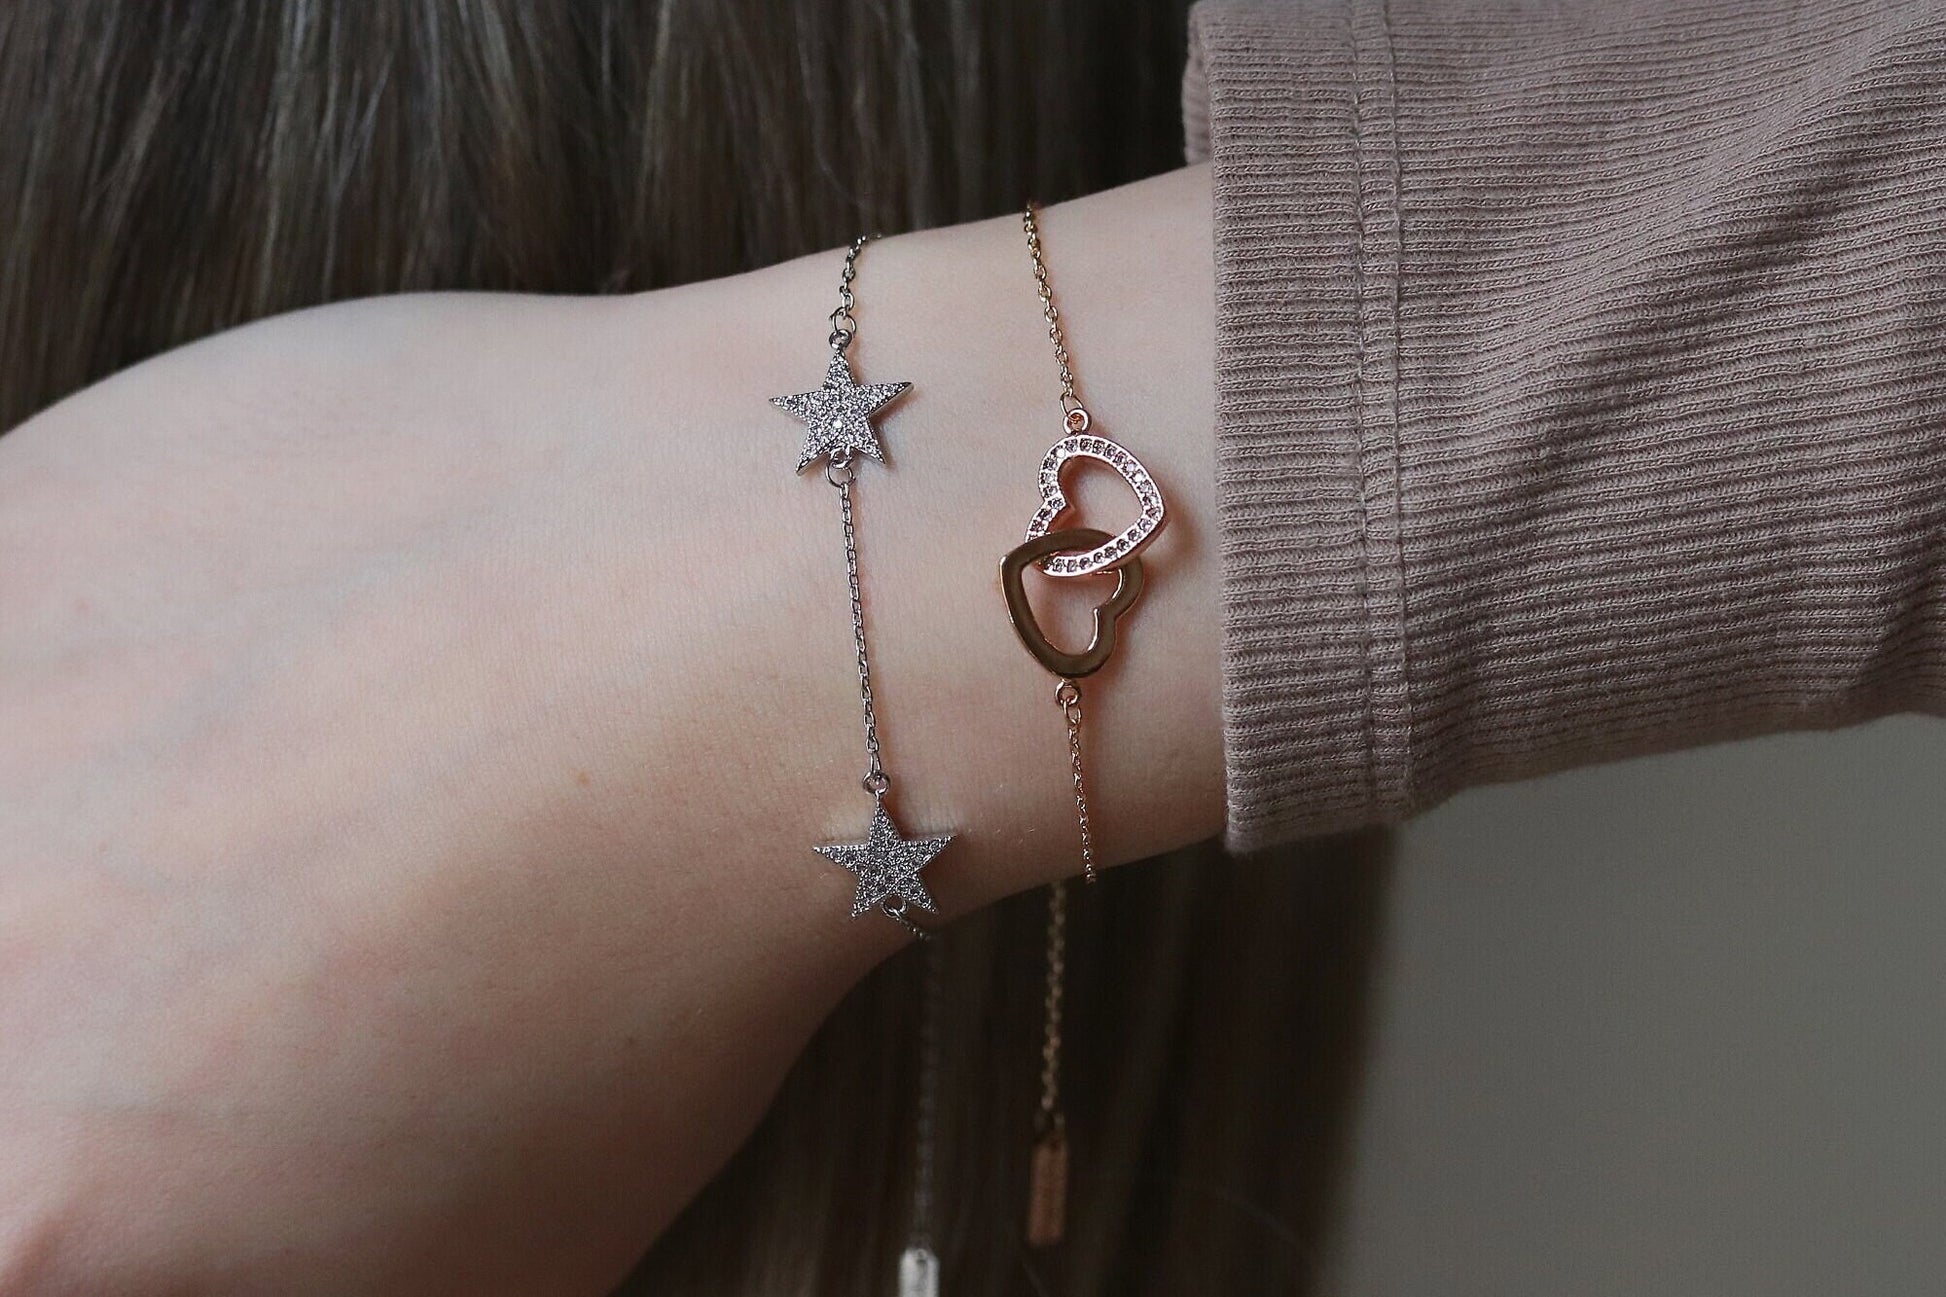 Mother Daughter Interlinking Heart Bracelets in Silver / Rose Gold / Gold, Personalised CZ Crystal Pave Bracelet, Mother's Day Gift for Her